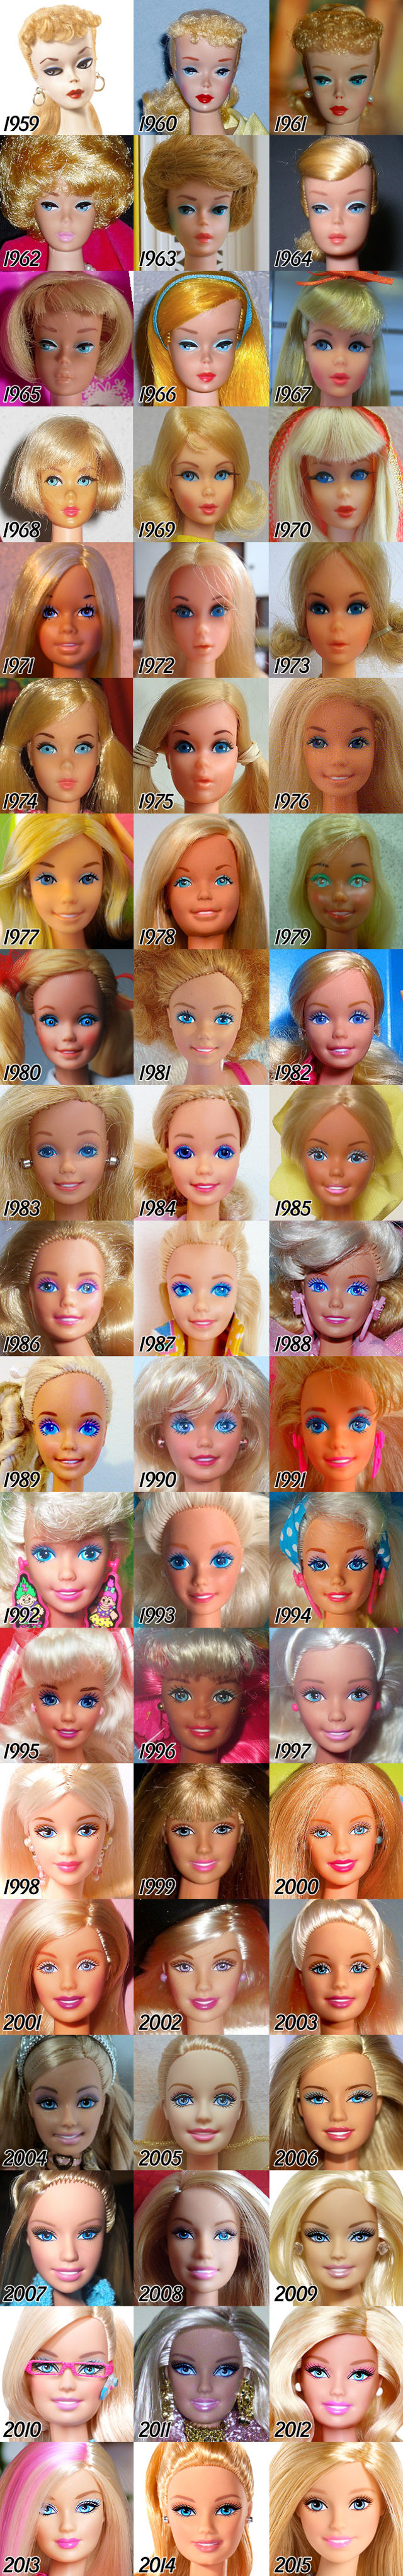 barbie-through-the-years-small